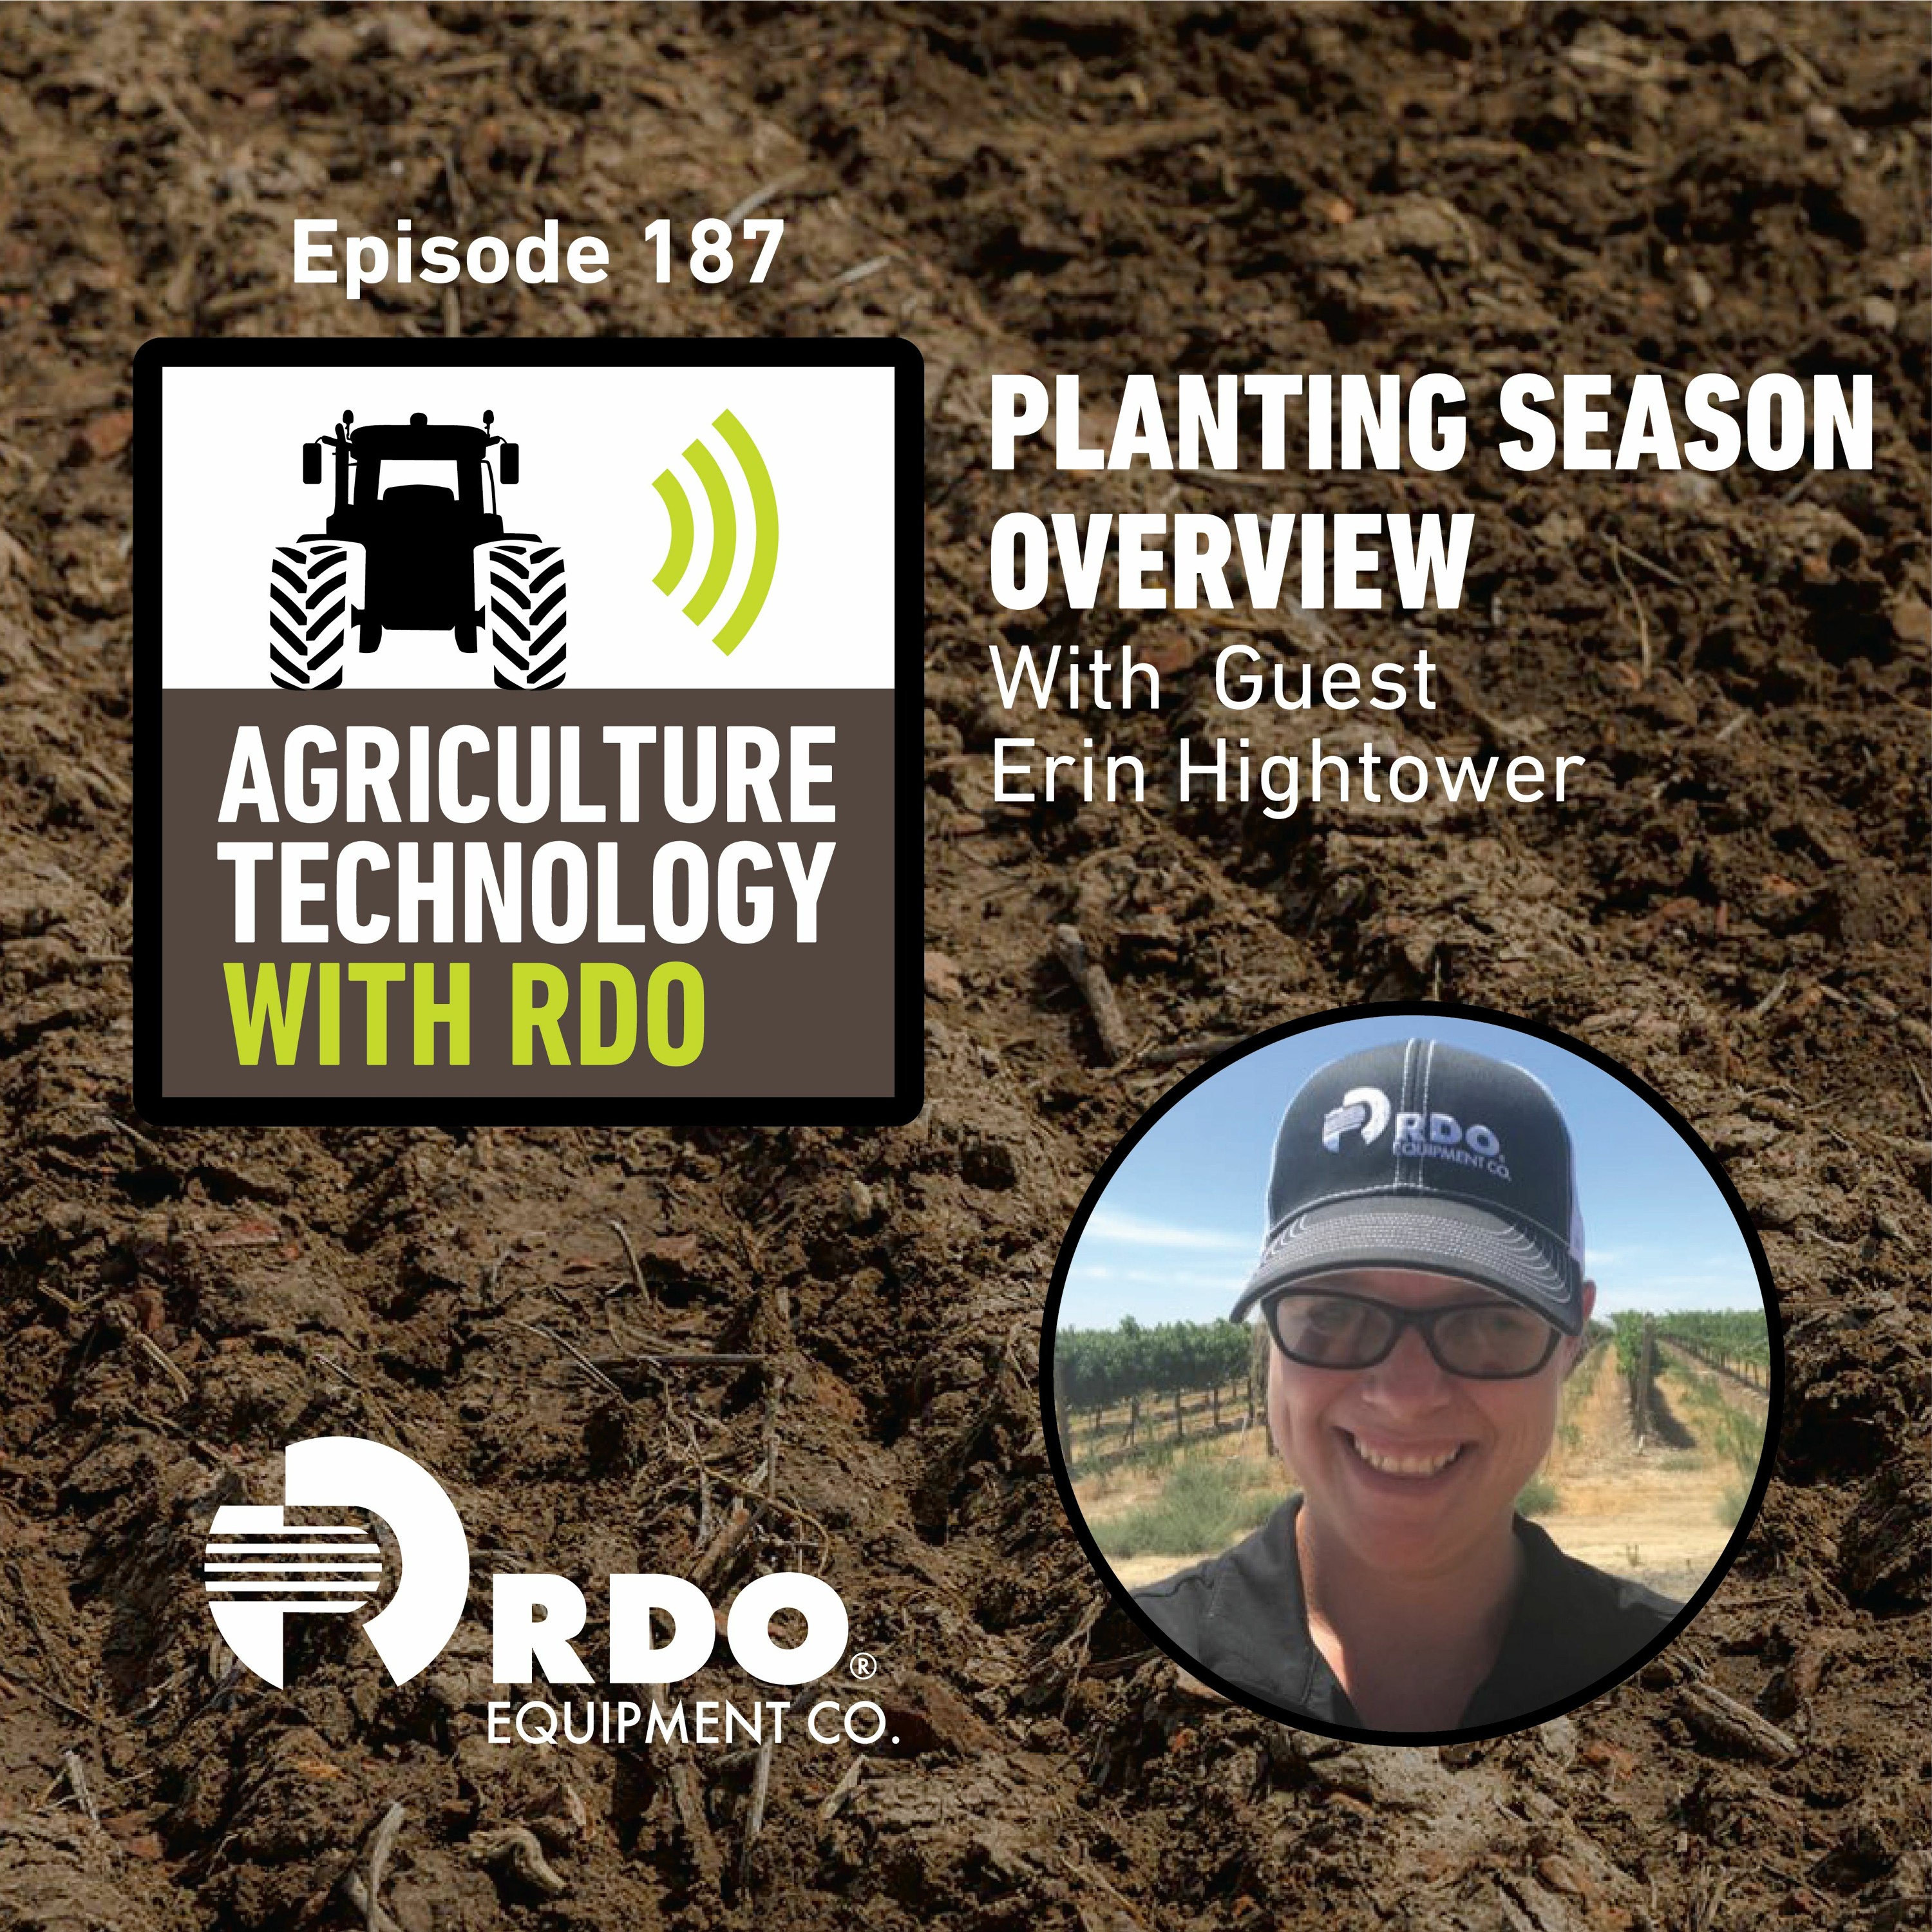 Ep. 187 - Planting Season Overview with Guest Erin Hightower